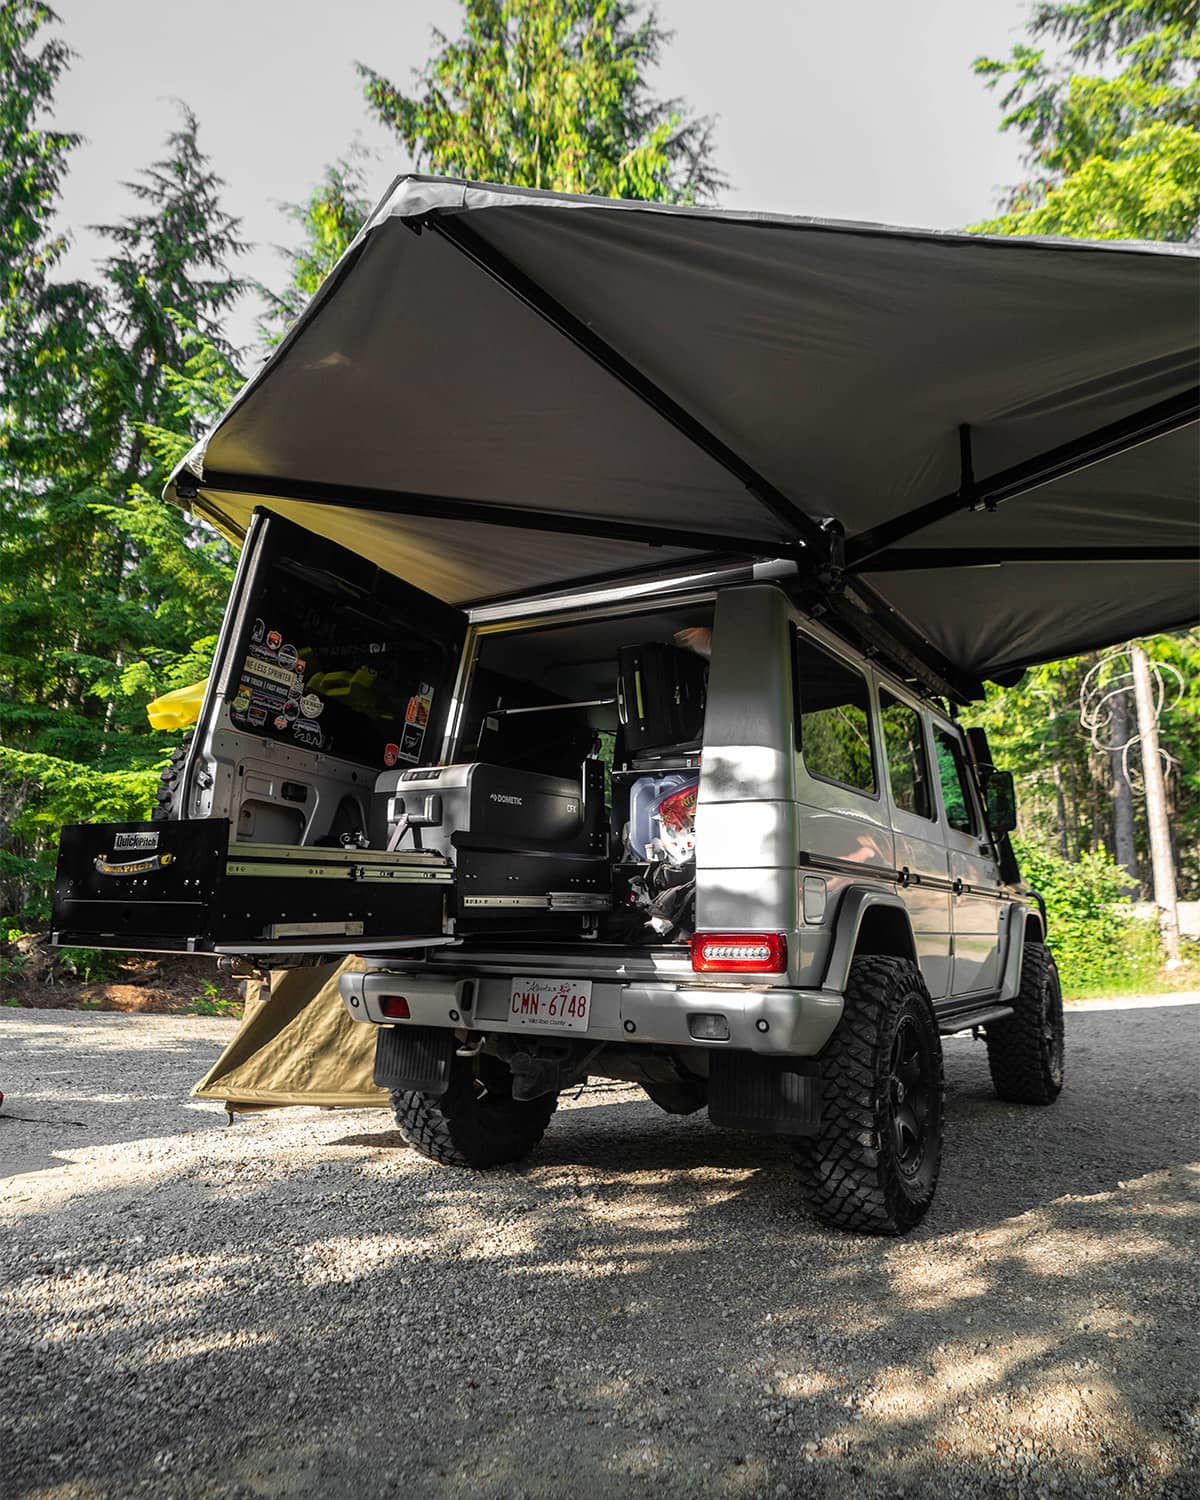 Mercedes G Wagon Overland drawer kitchen setup and Quick pitch 270-degree awning and change room